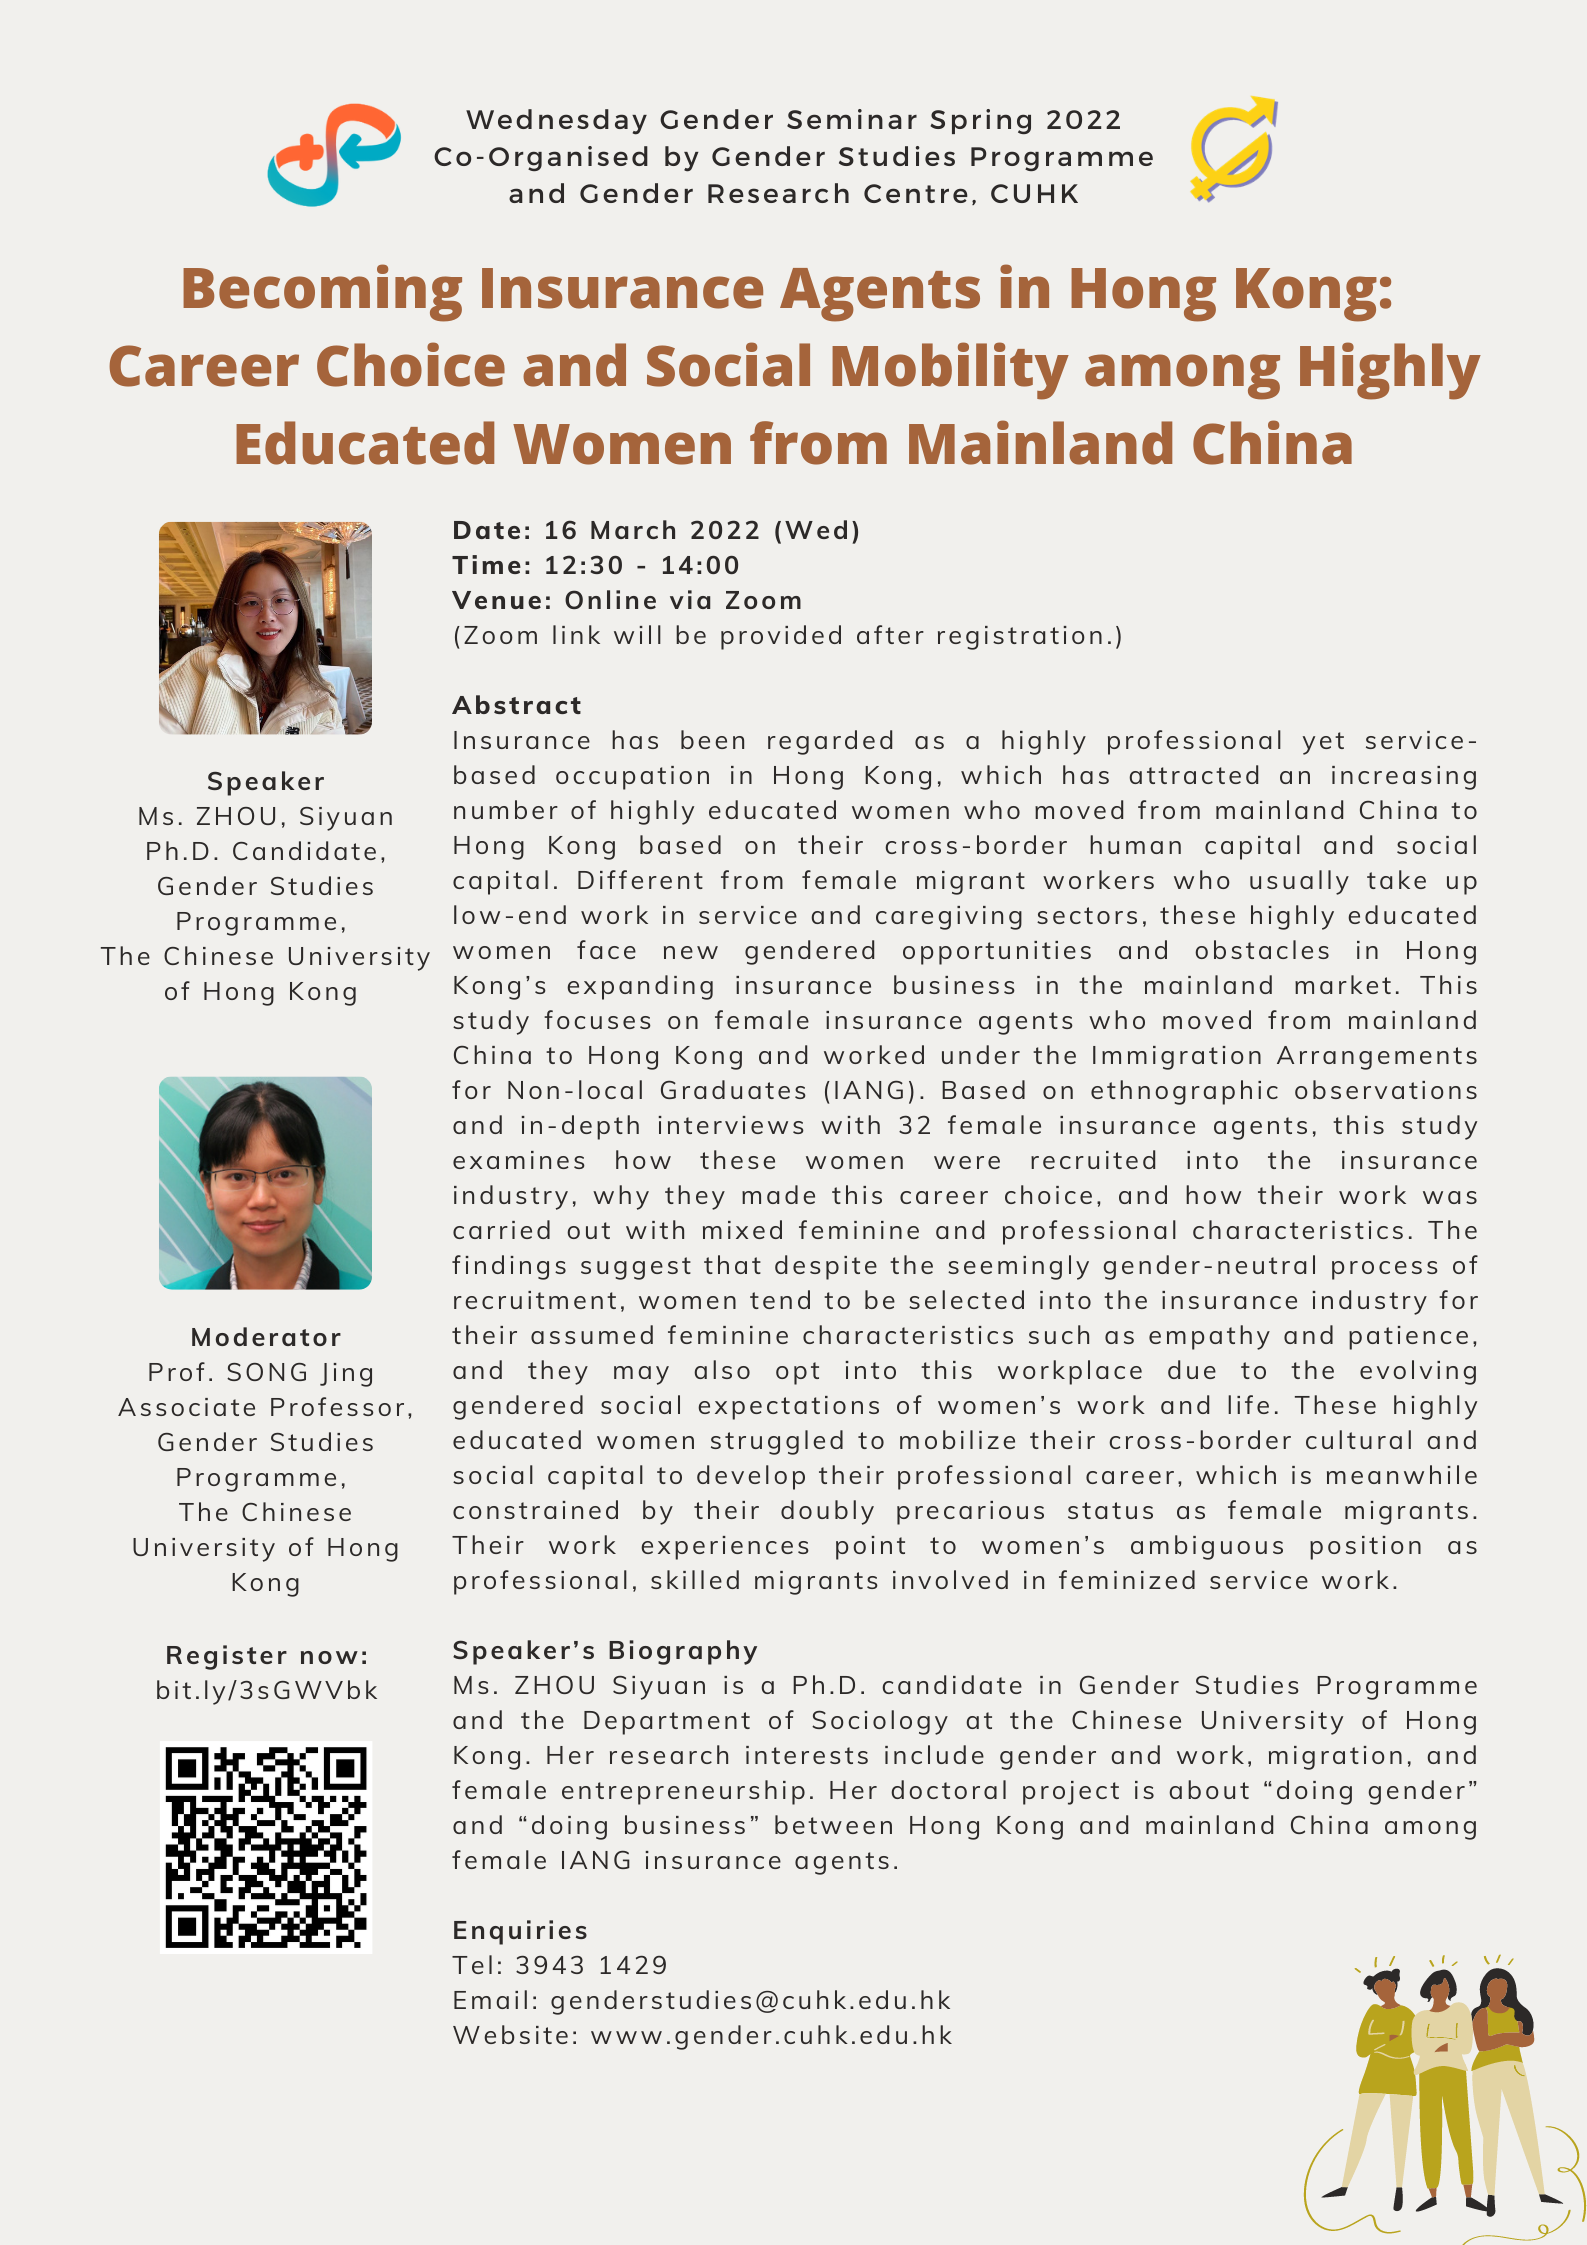 Becoming Insurance Agents in Hong Kong Career Choice and Social Mobility among Highly Educated Women from Mainland China